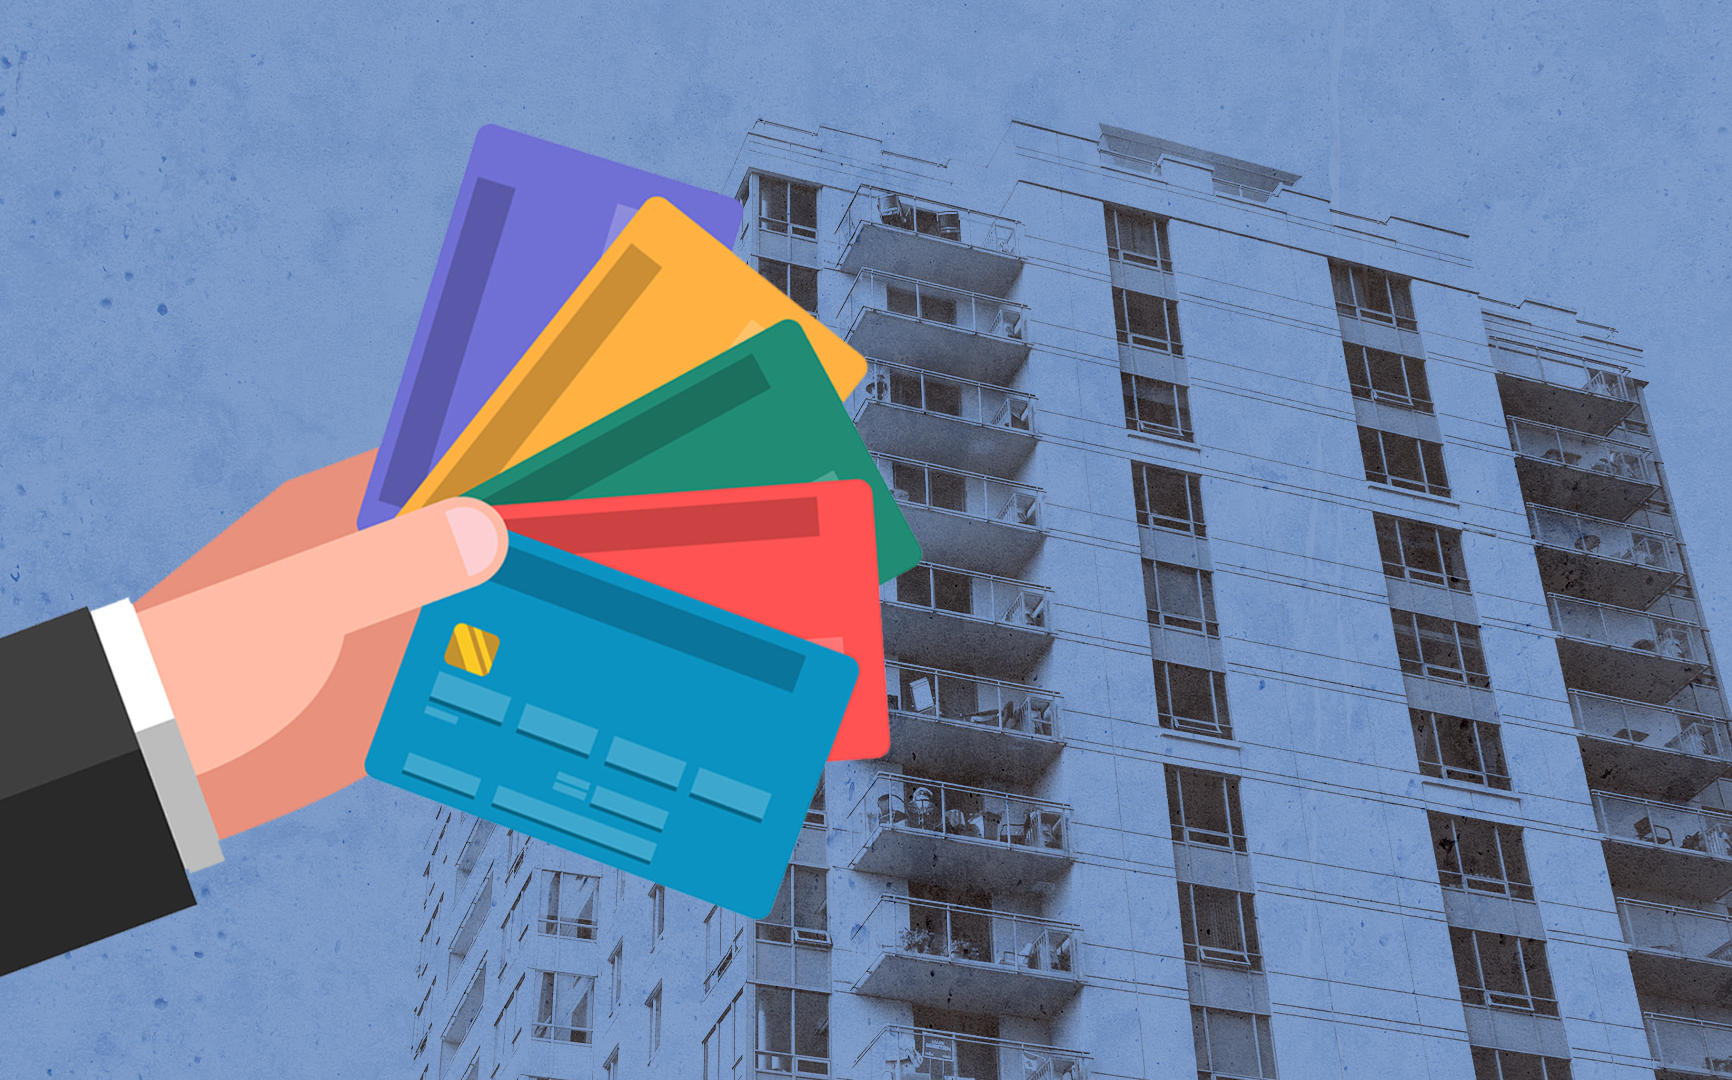 Many of the newly unemployed are relying on credit cards to make their April rent payments, and many landlords are covering transaction fees. (Credit: iStock)